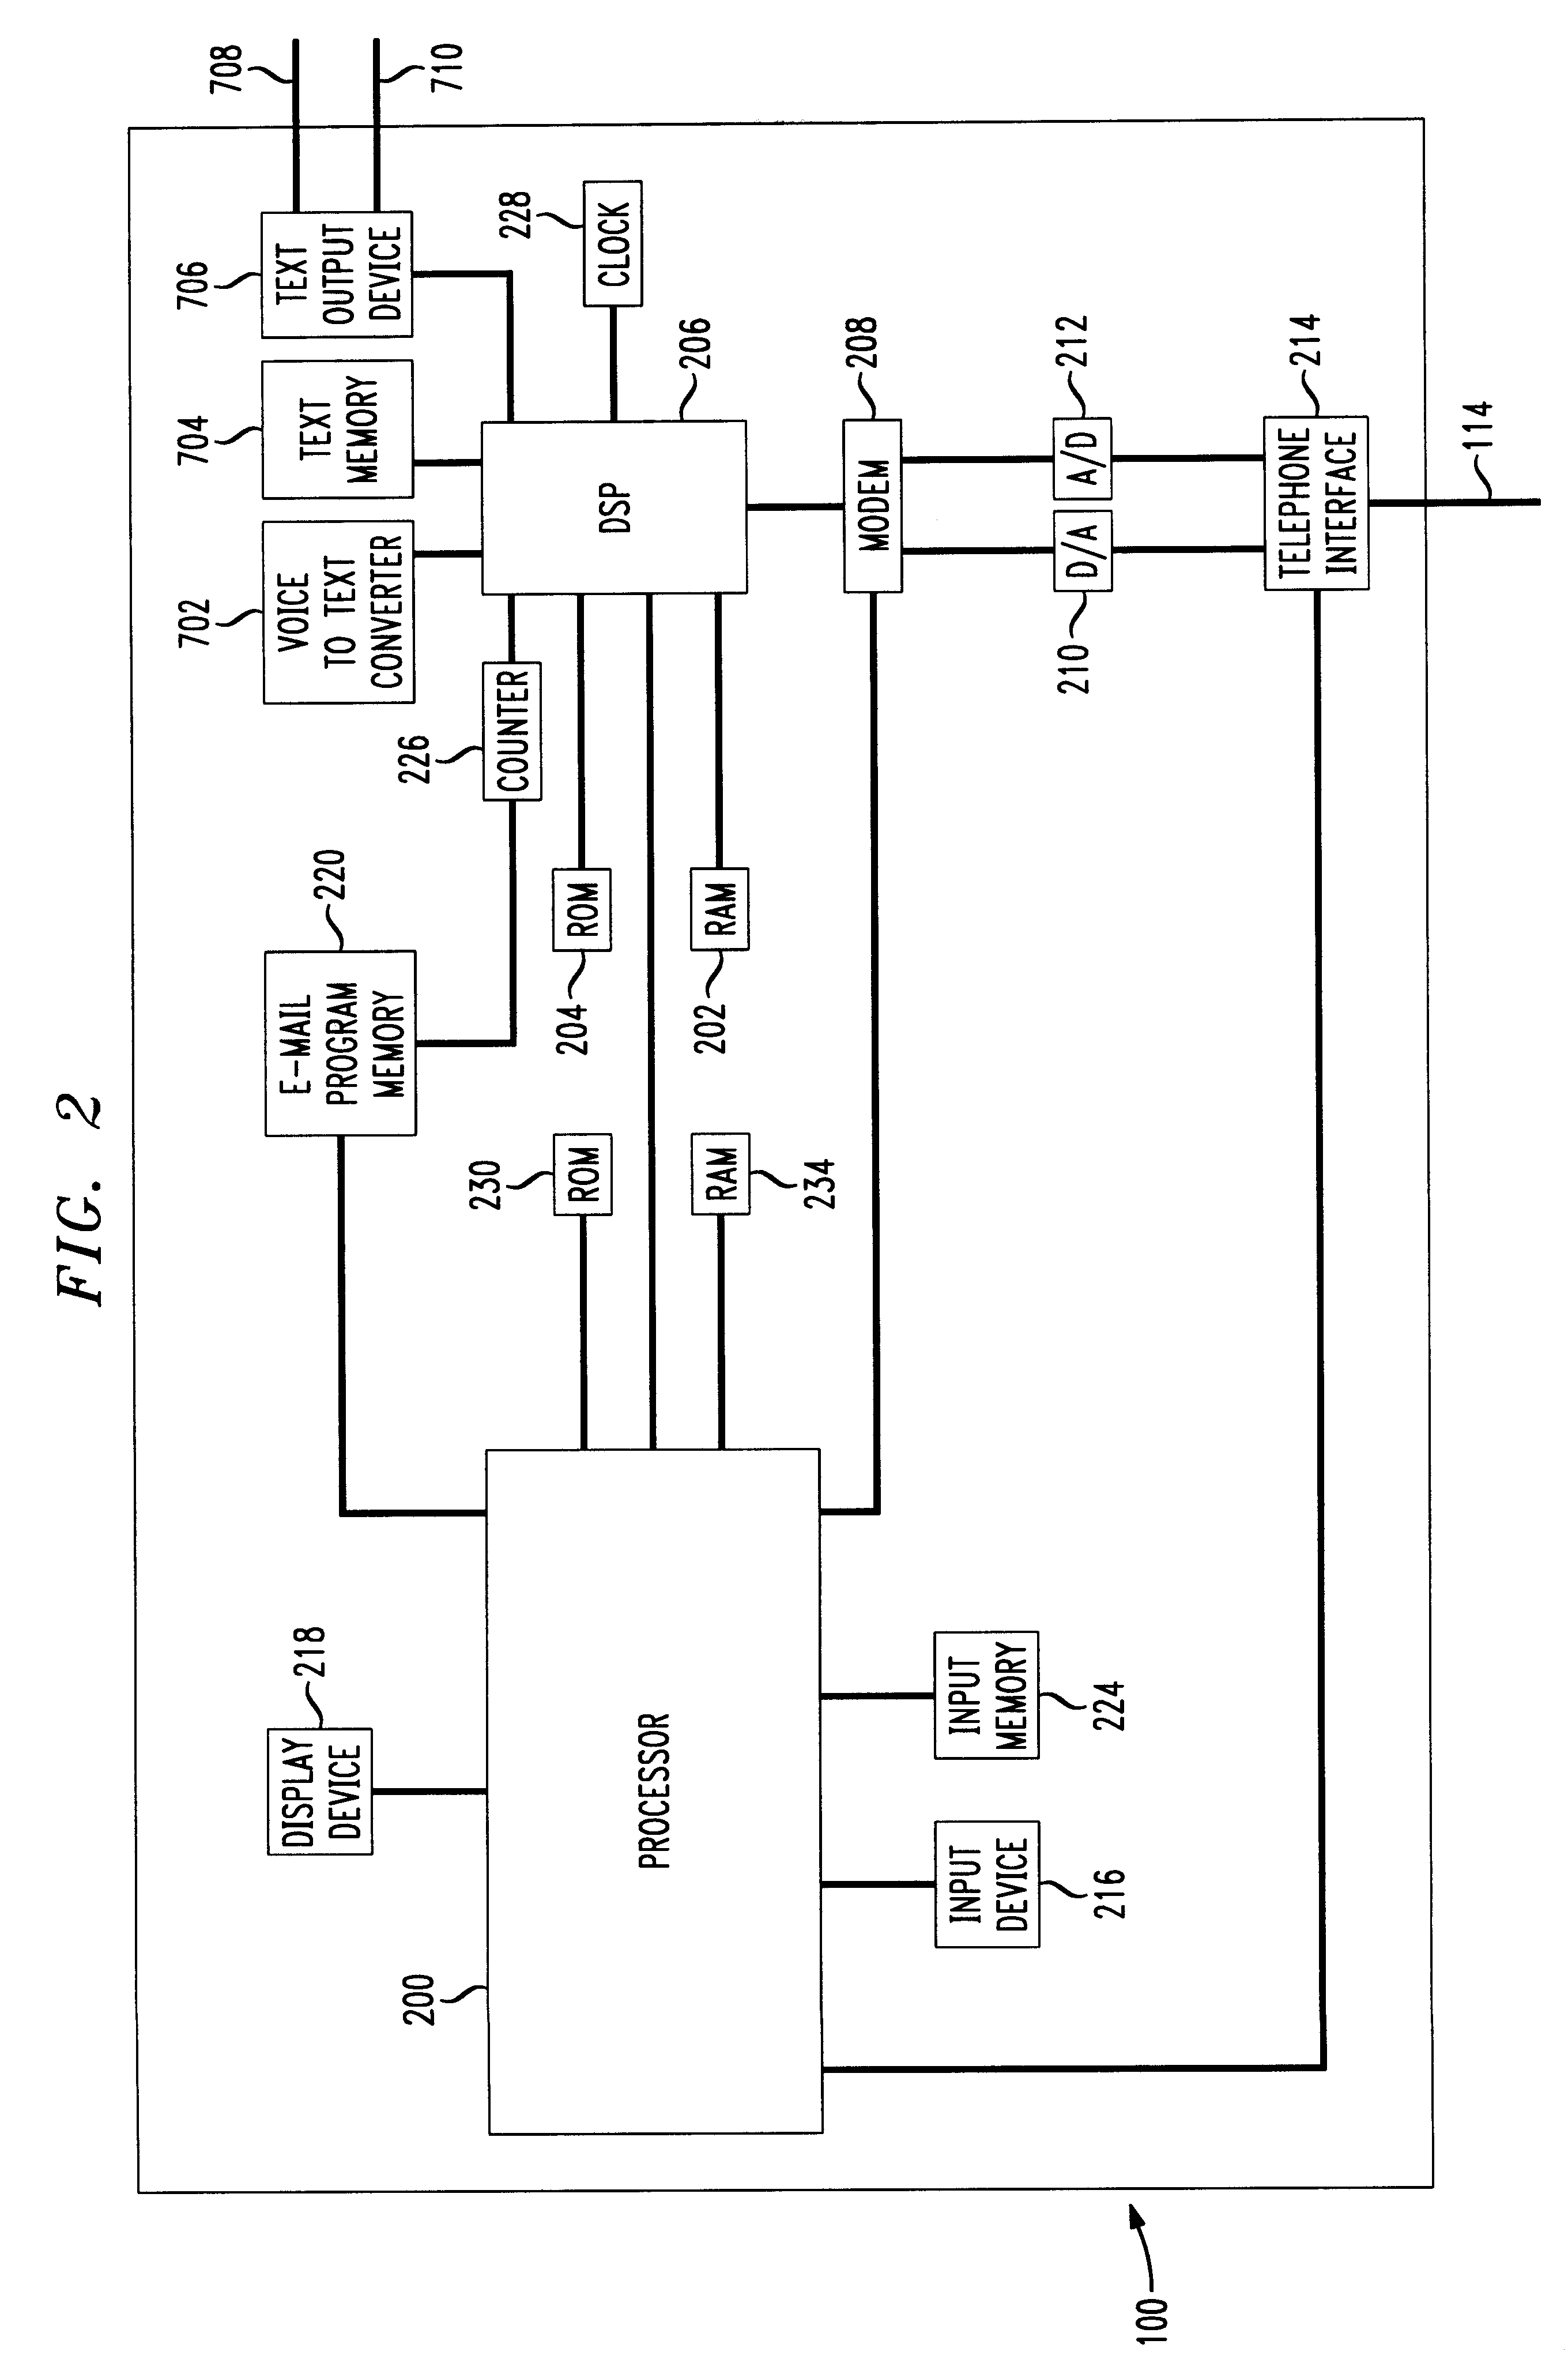 Automatic transmission of voice-to-text converted voice message